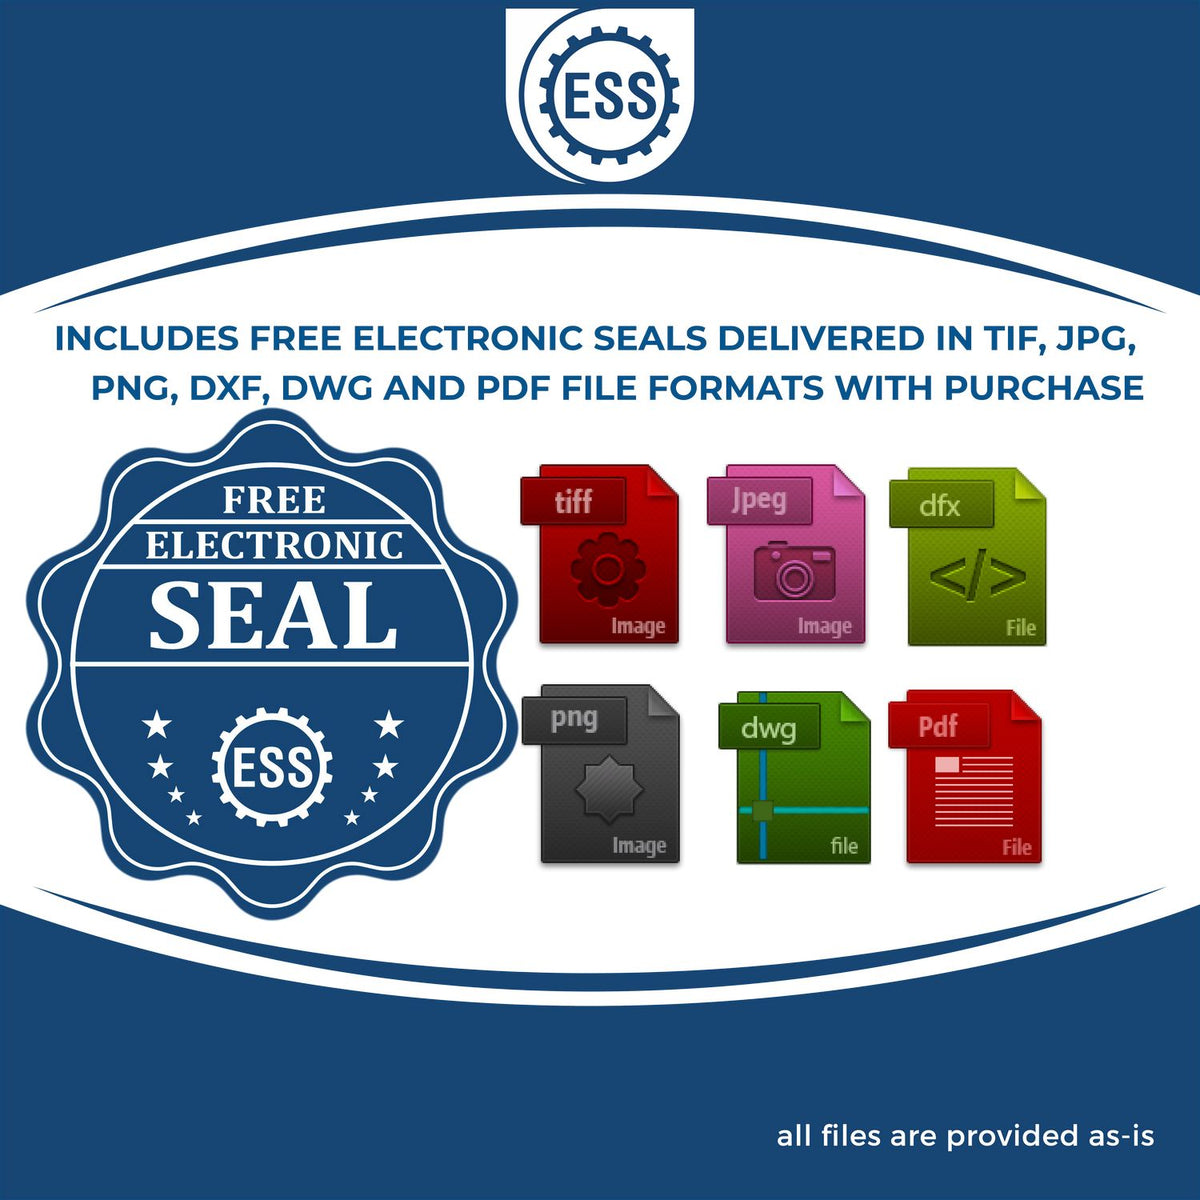 An infographic for the free electronic seal for the Heavy Duty Cast Iron Kansas Engineer Seal Embosser illustrating the different file type icons such as DXF, DWG, TIF, JPG and PNG.